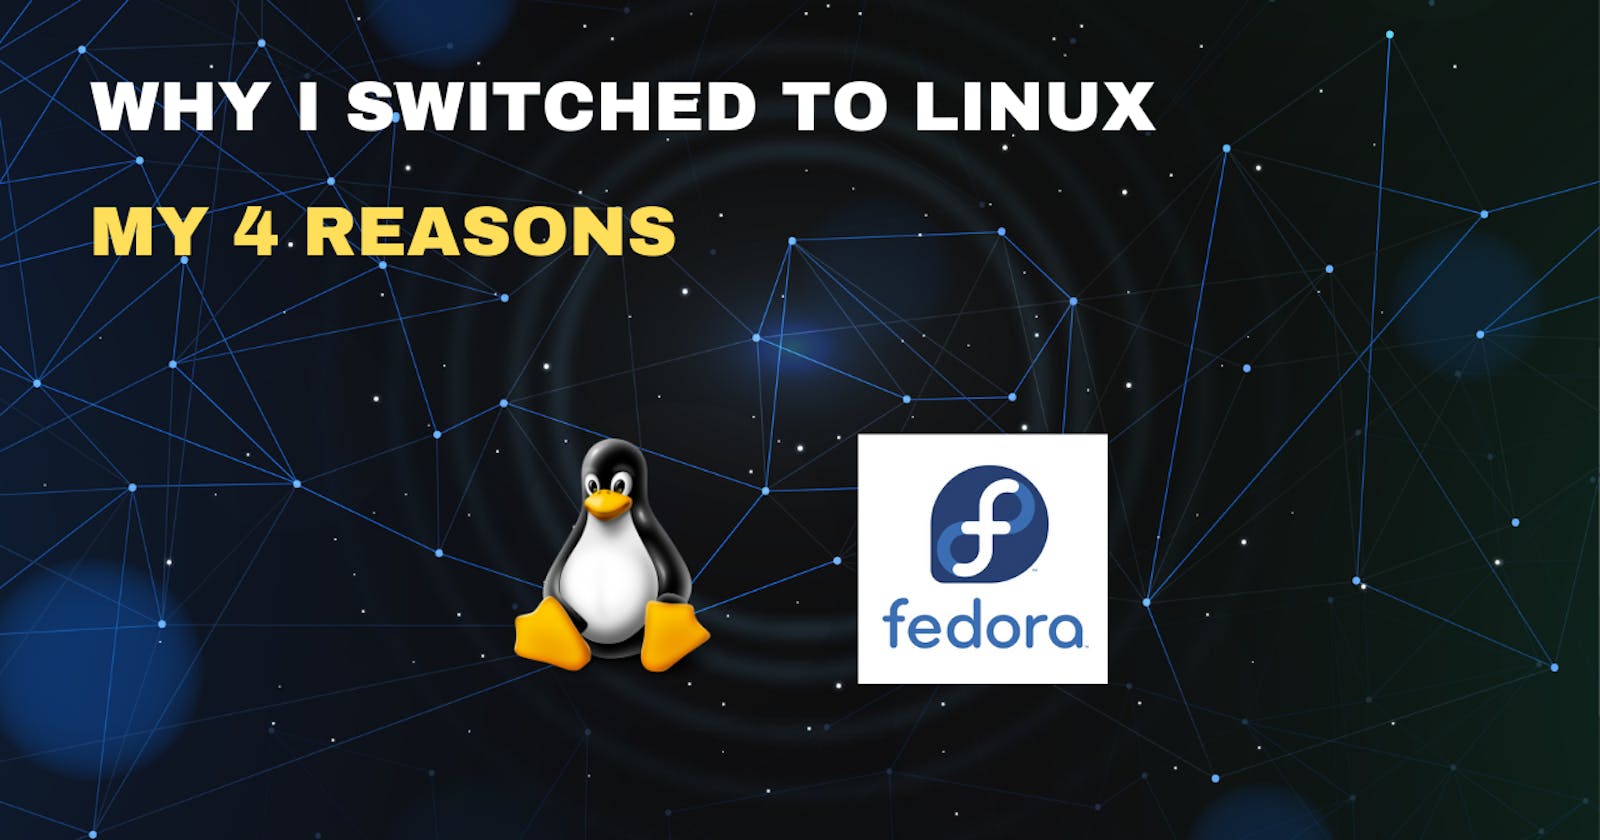 Why I switched to Linux - my 4 reasons